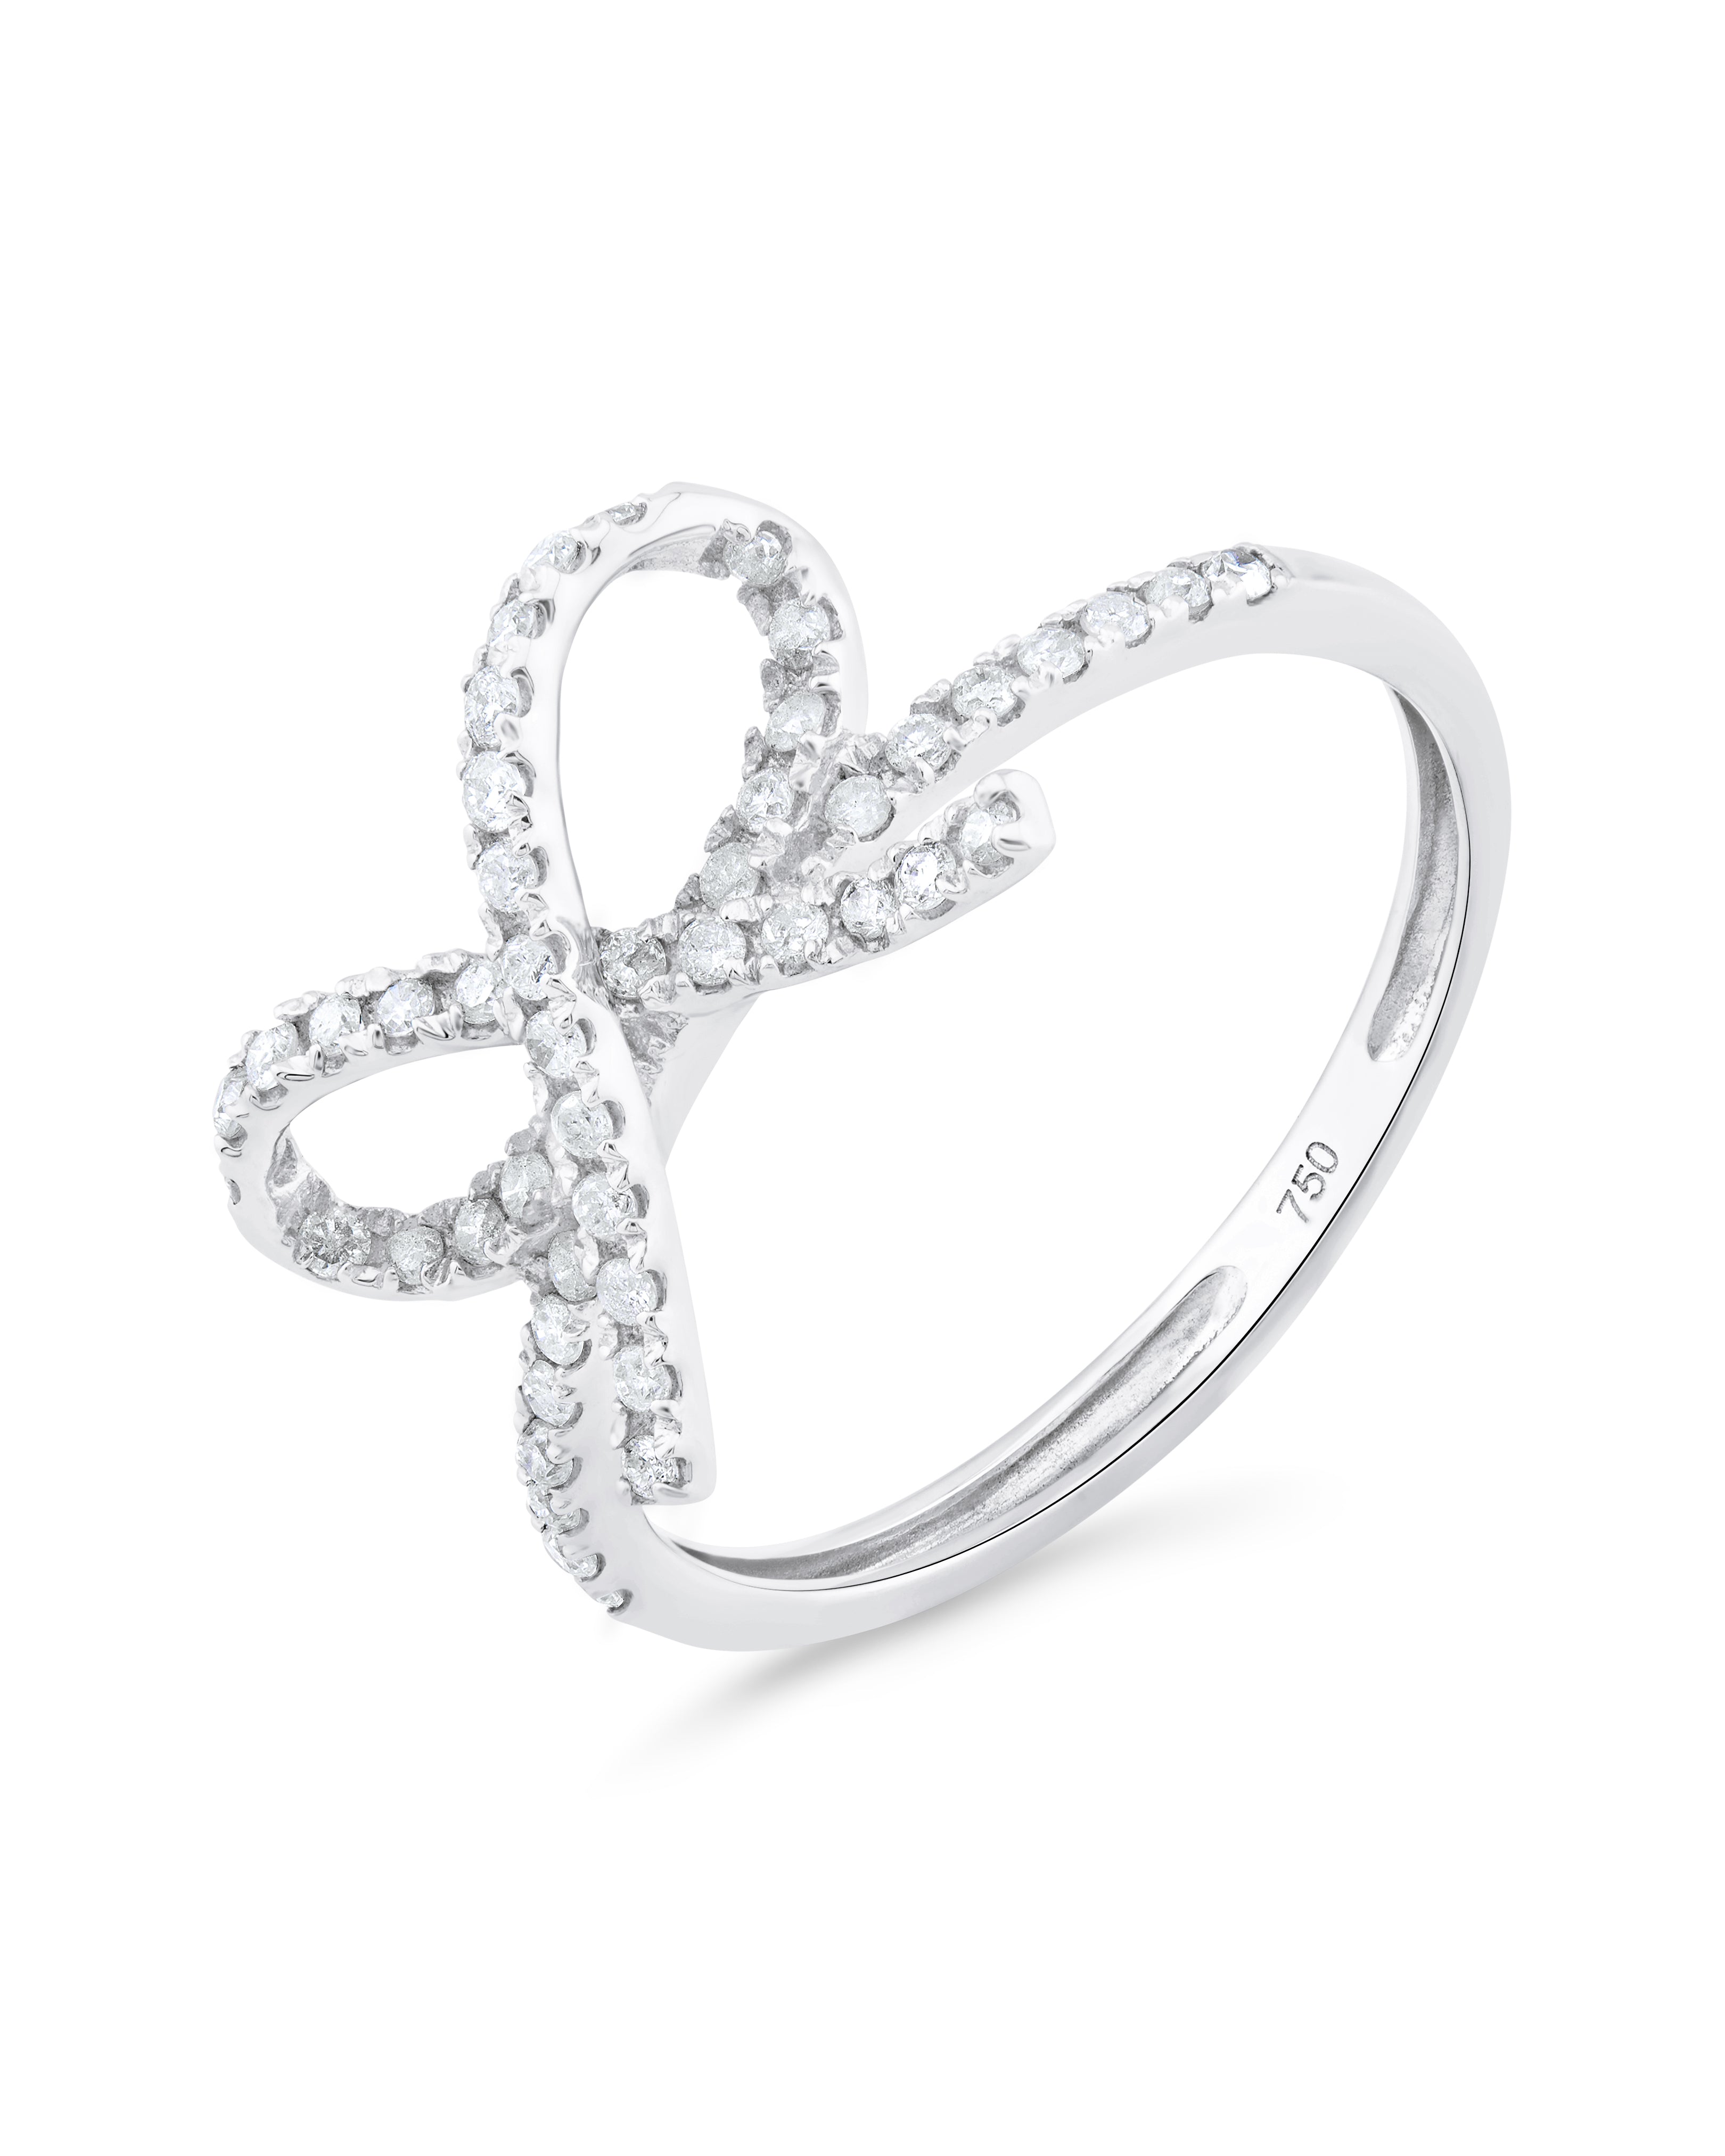 AMORE- Infinity Promise Ring